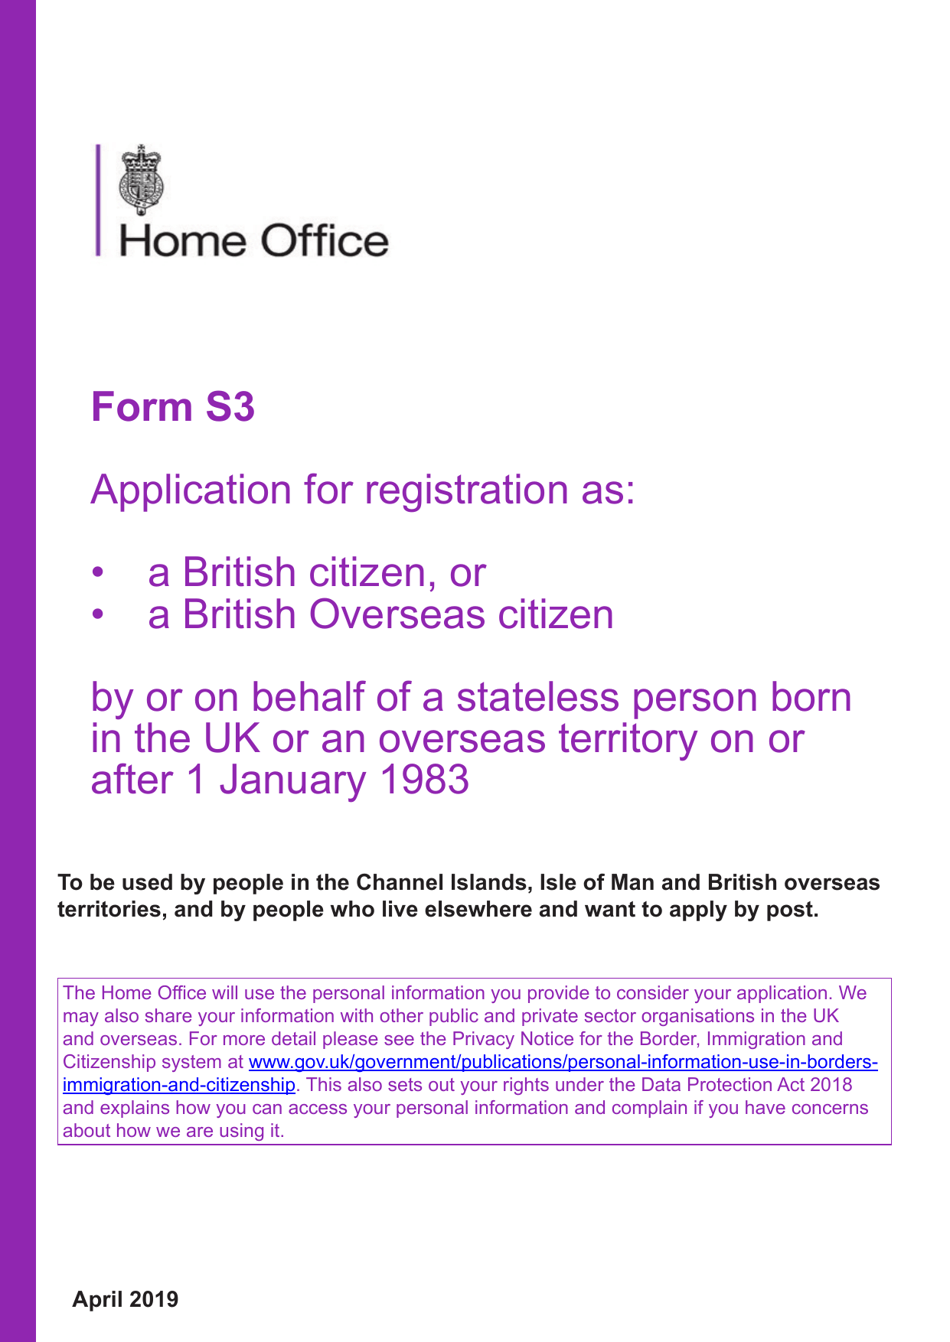 Form S3 Application for Registration as a British Citizen, or a British Overseas Citizen - United Kingdom, Page 1